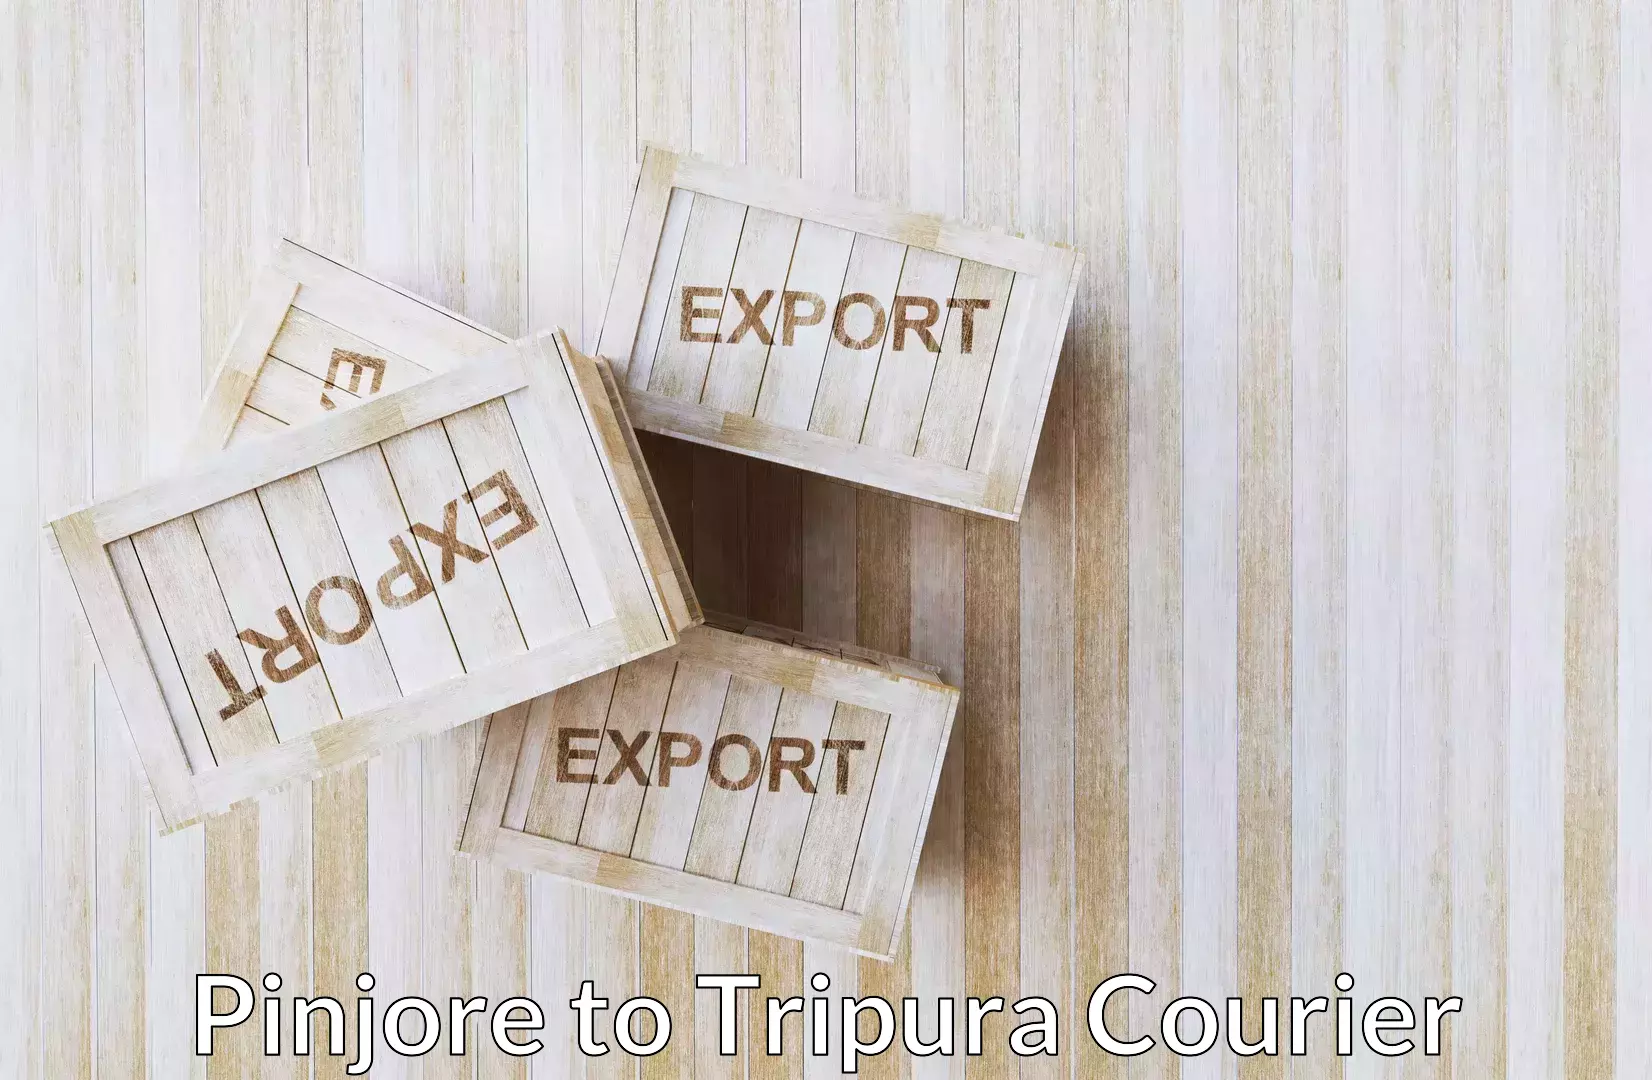 Instant baggage transport quote Pinjore to Tripura